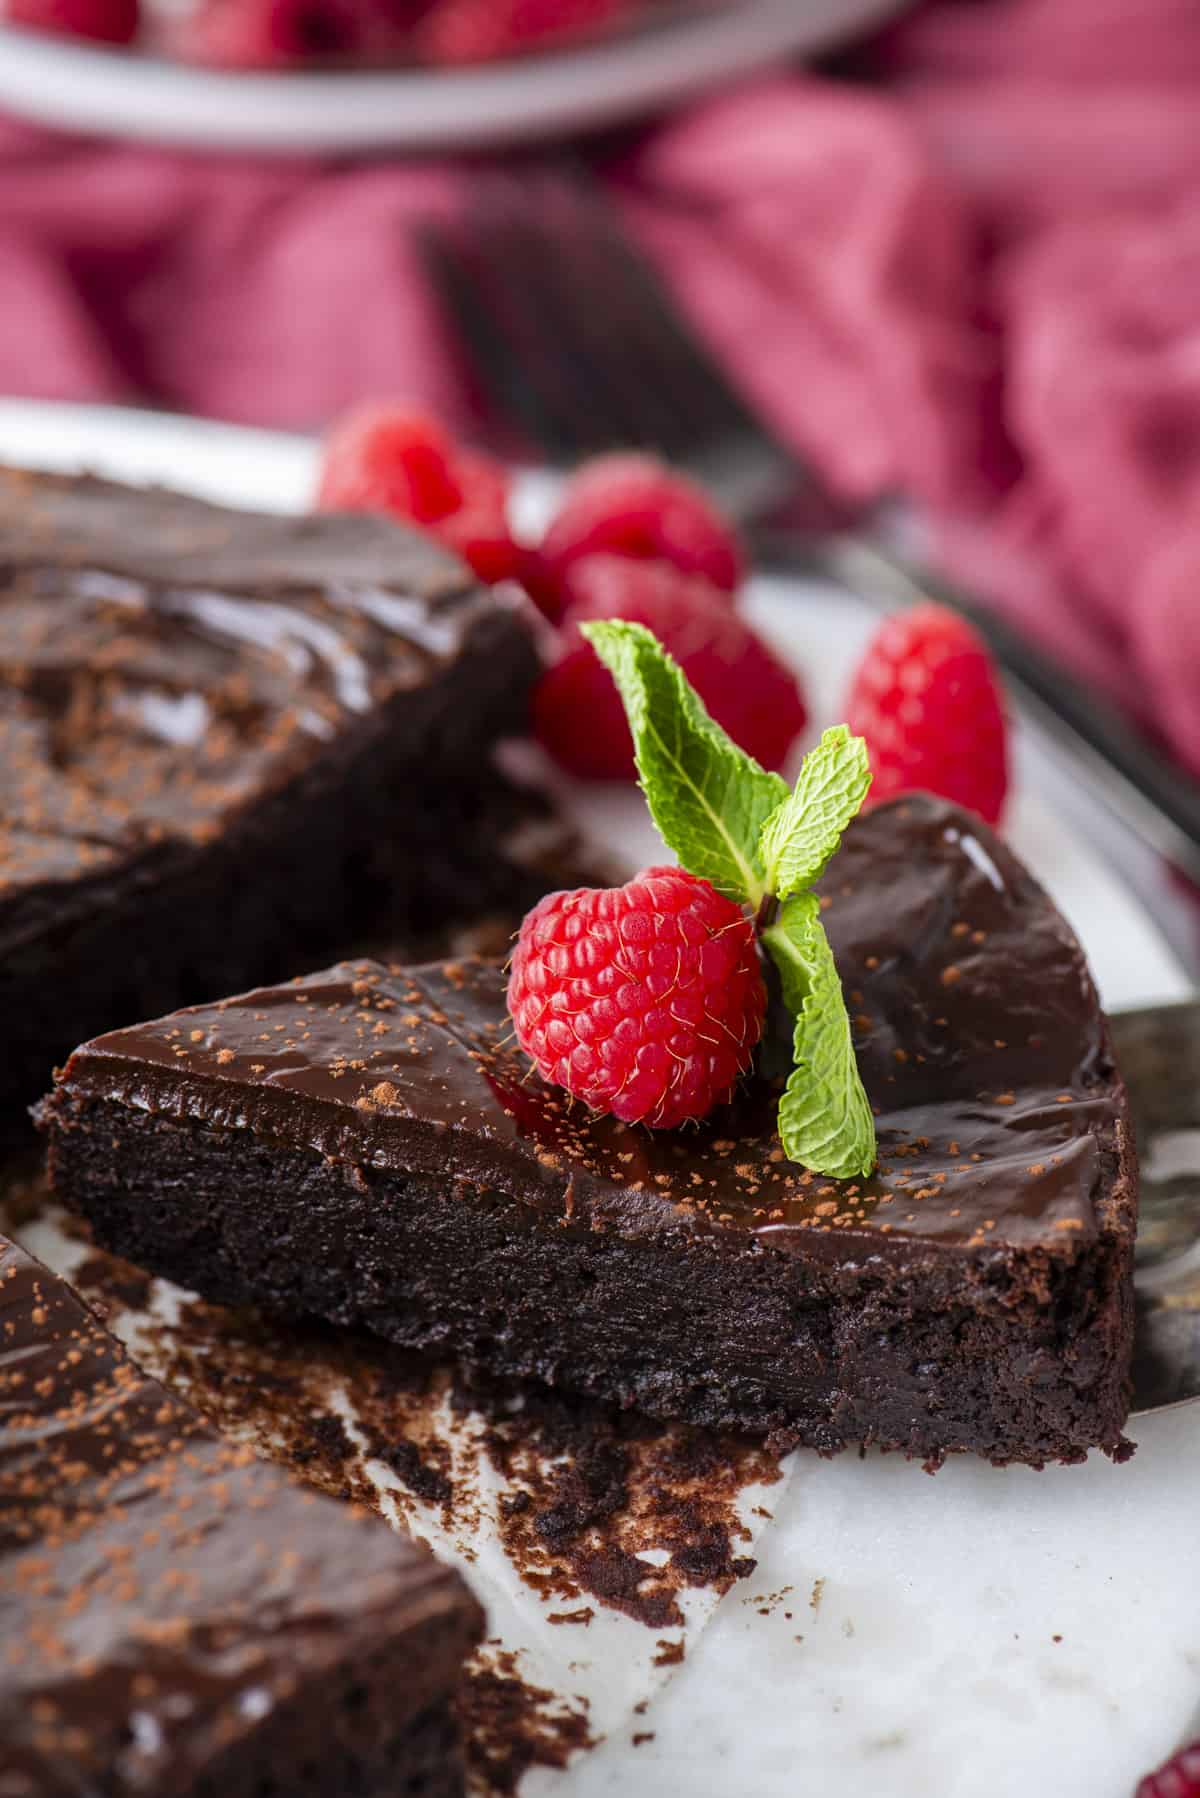 a slice of flourless chocolate cake being lifted away from the rest of the cake, topped with a fresh raspberry and mint leaves